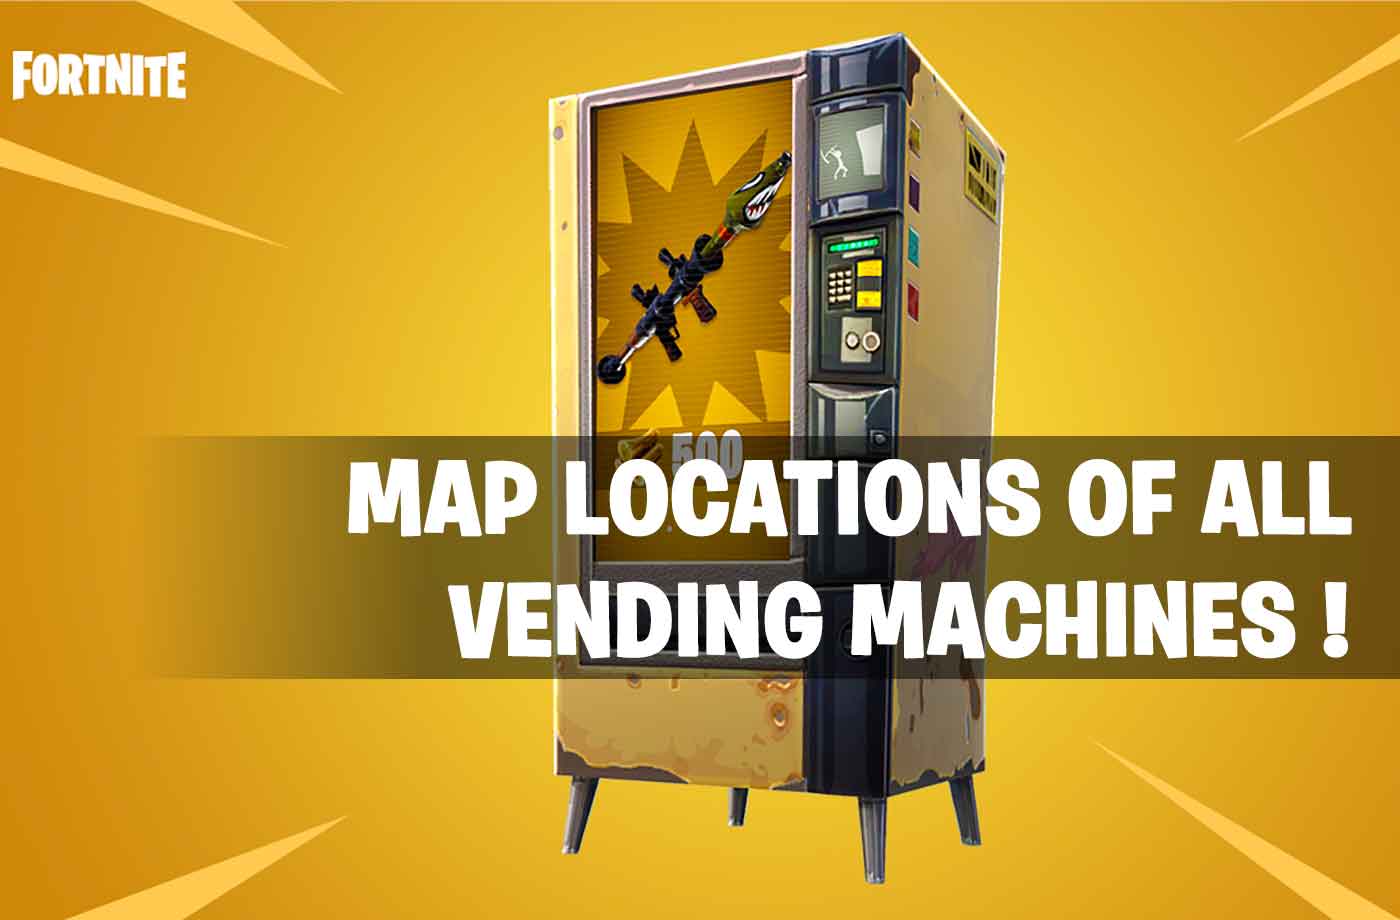 fortnite battle royale map locations of all vending machines - vending machine locations in fortnite season eight